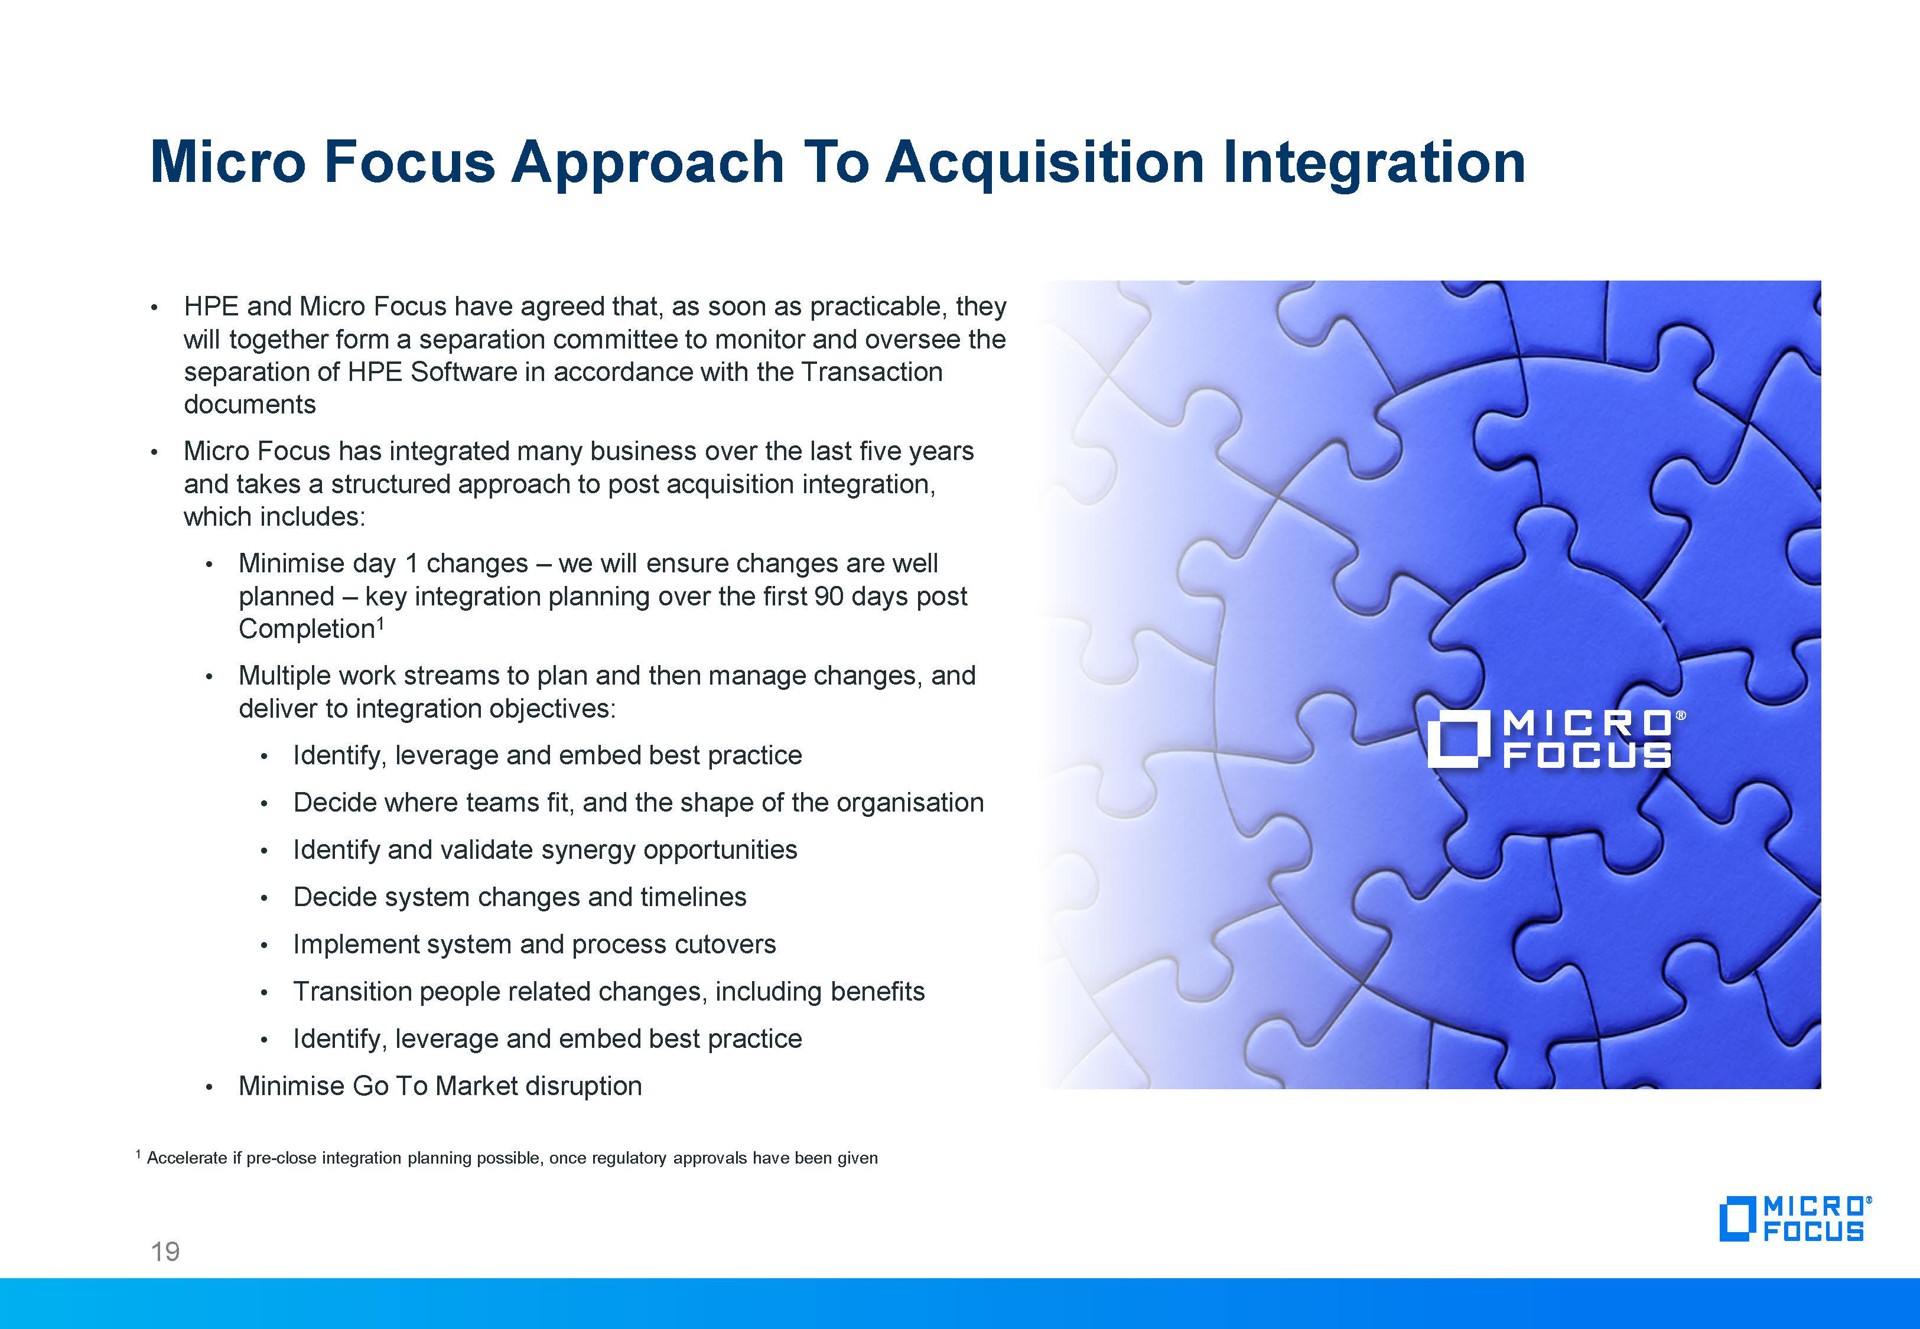 micro focus approach to acquisition integration | Micro Focus